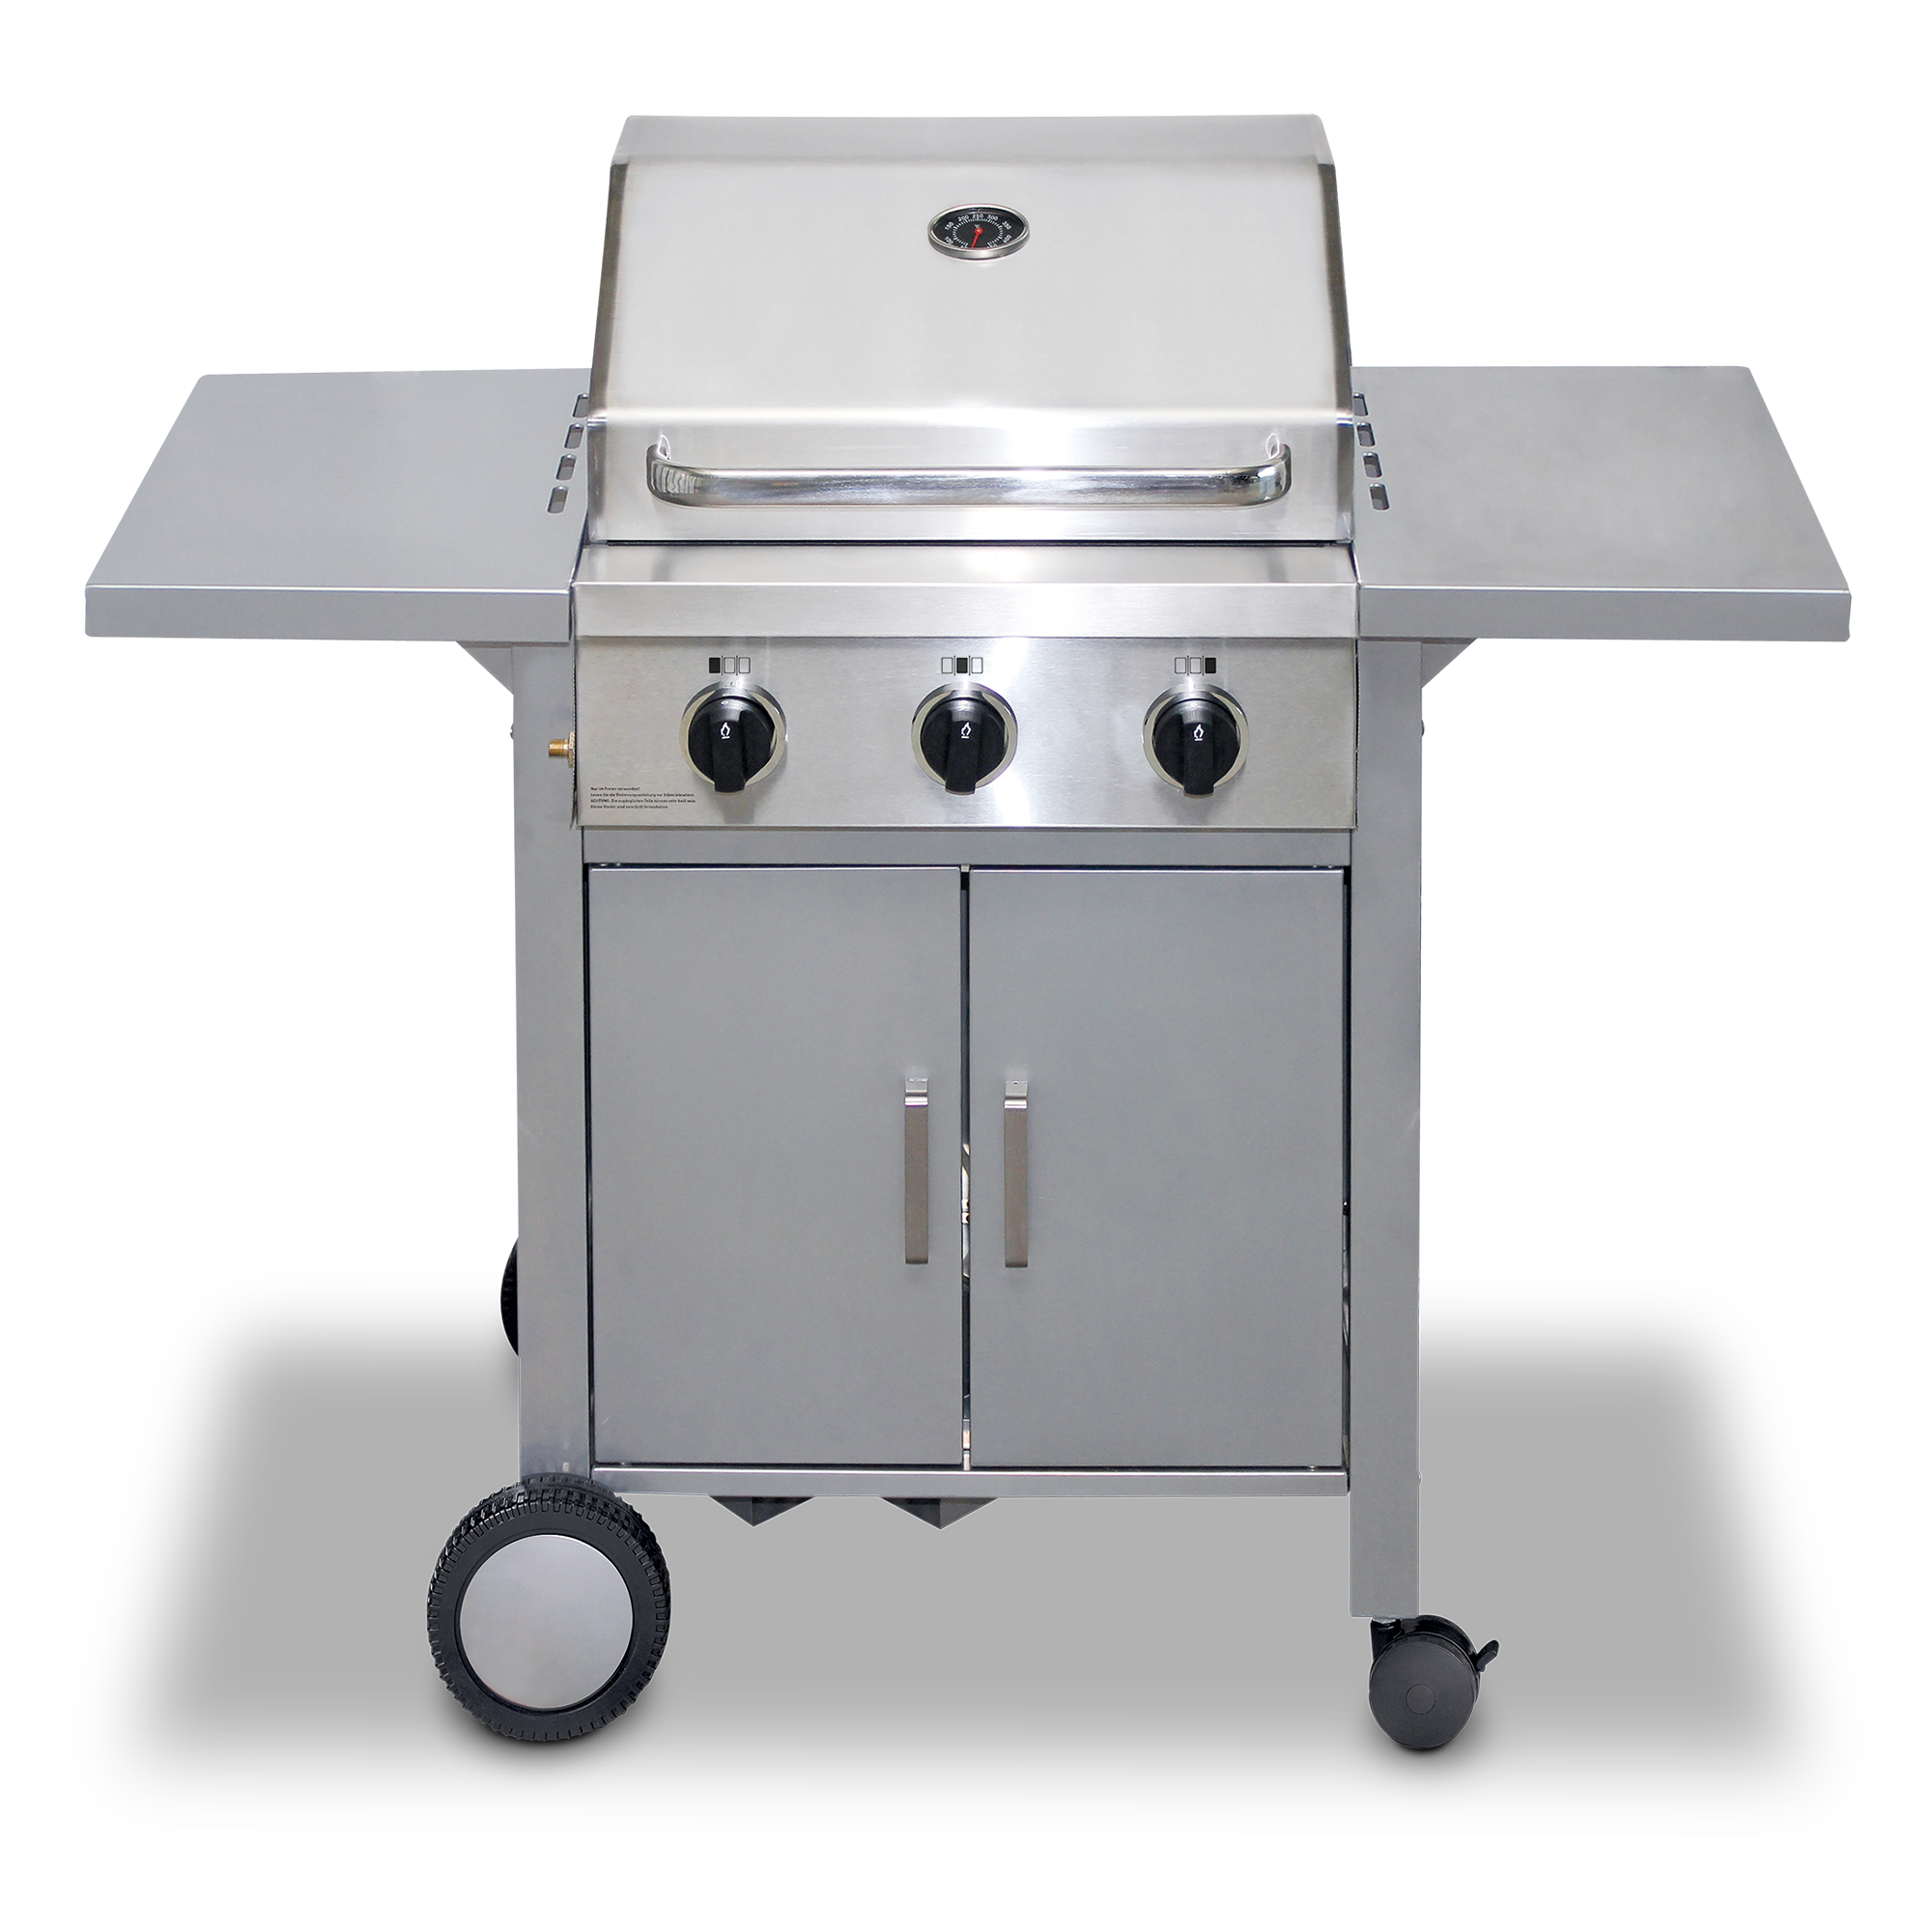 Gas-Grillküche 'Oakland' 3 Brenner + product picture